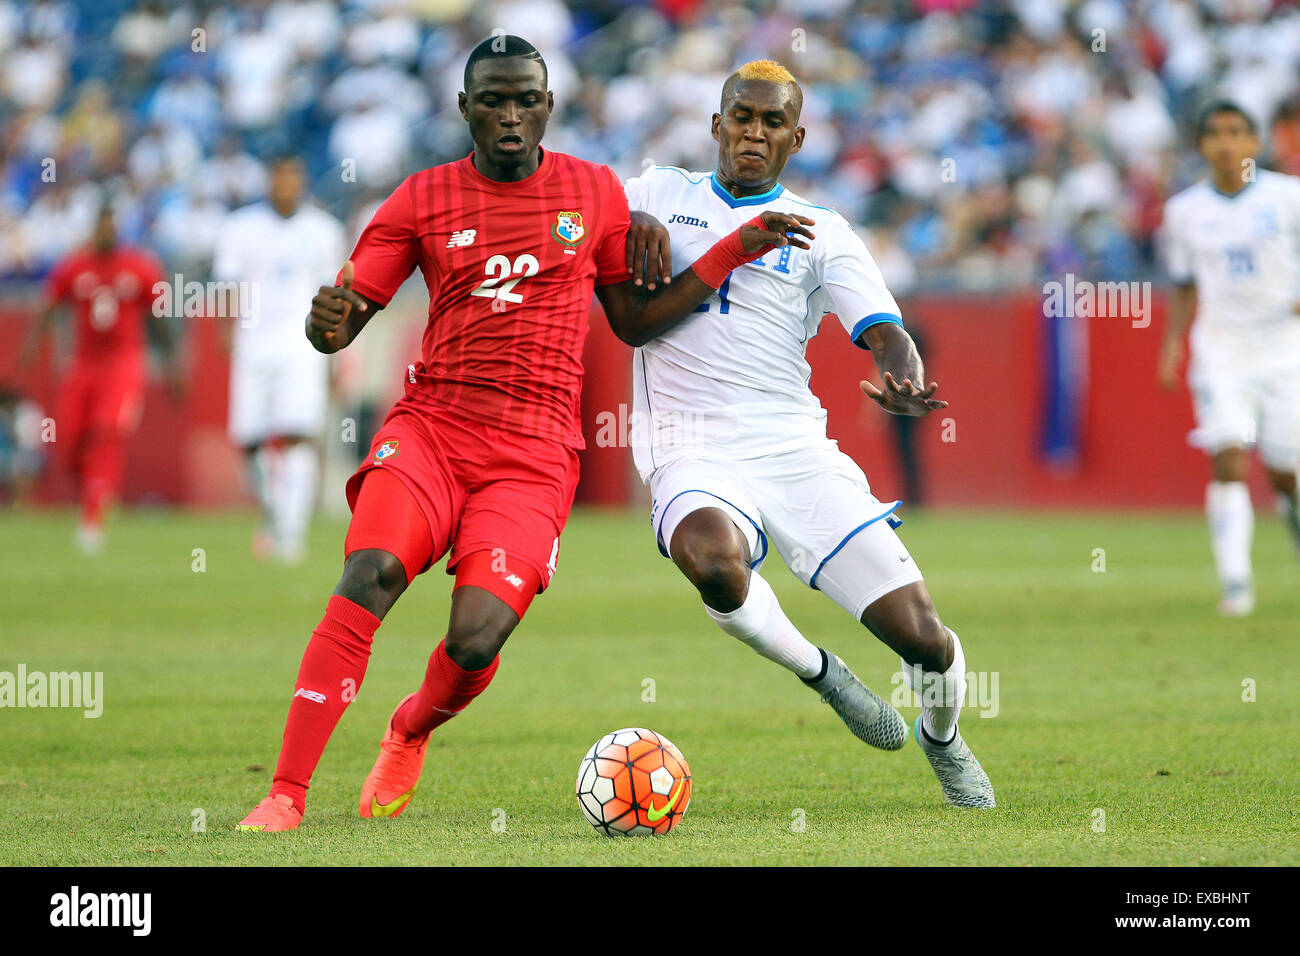 Foxborough, MA, USA. 10th July, 2015. Panama goalkeeper Jose Calderon (21) and Honduras defender Brayan Beckeles (21) battle for the ball during the second half of the CONCACAF Gold Cup match between Panama and Honduras at Gillette Stadium. The match ended in a 1-1 tie. Anthony Nesmith/Cal Sport Media Credit:  Cal Sport Media/Alamy Live News Stock Photo